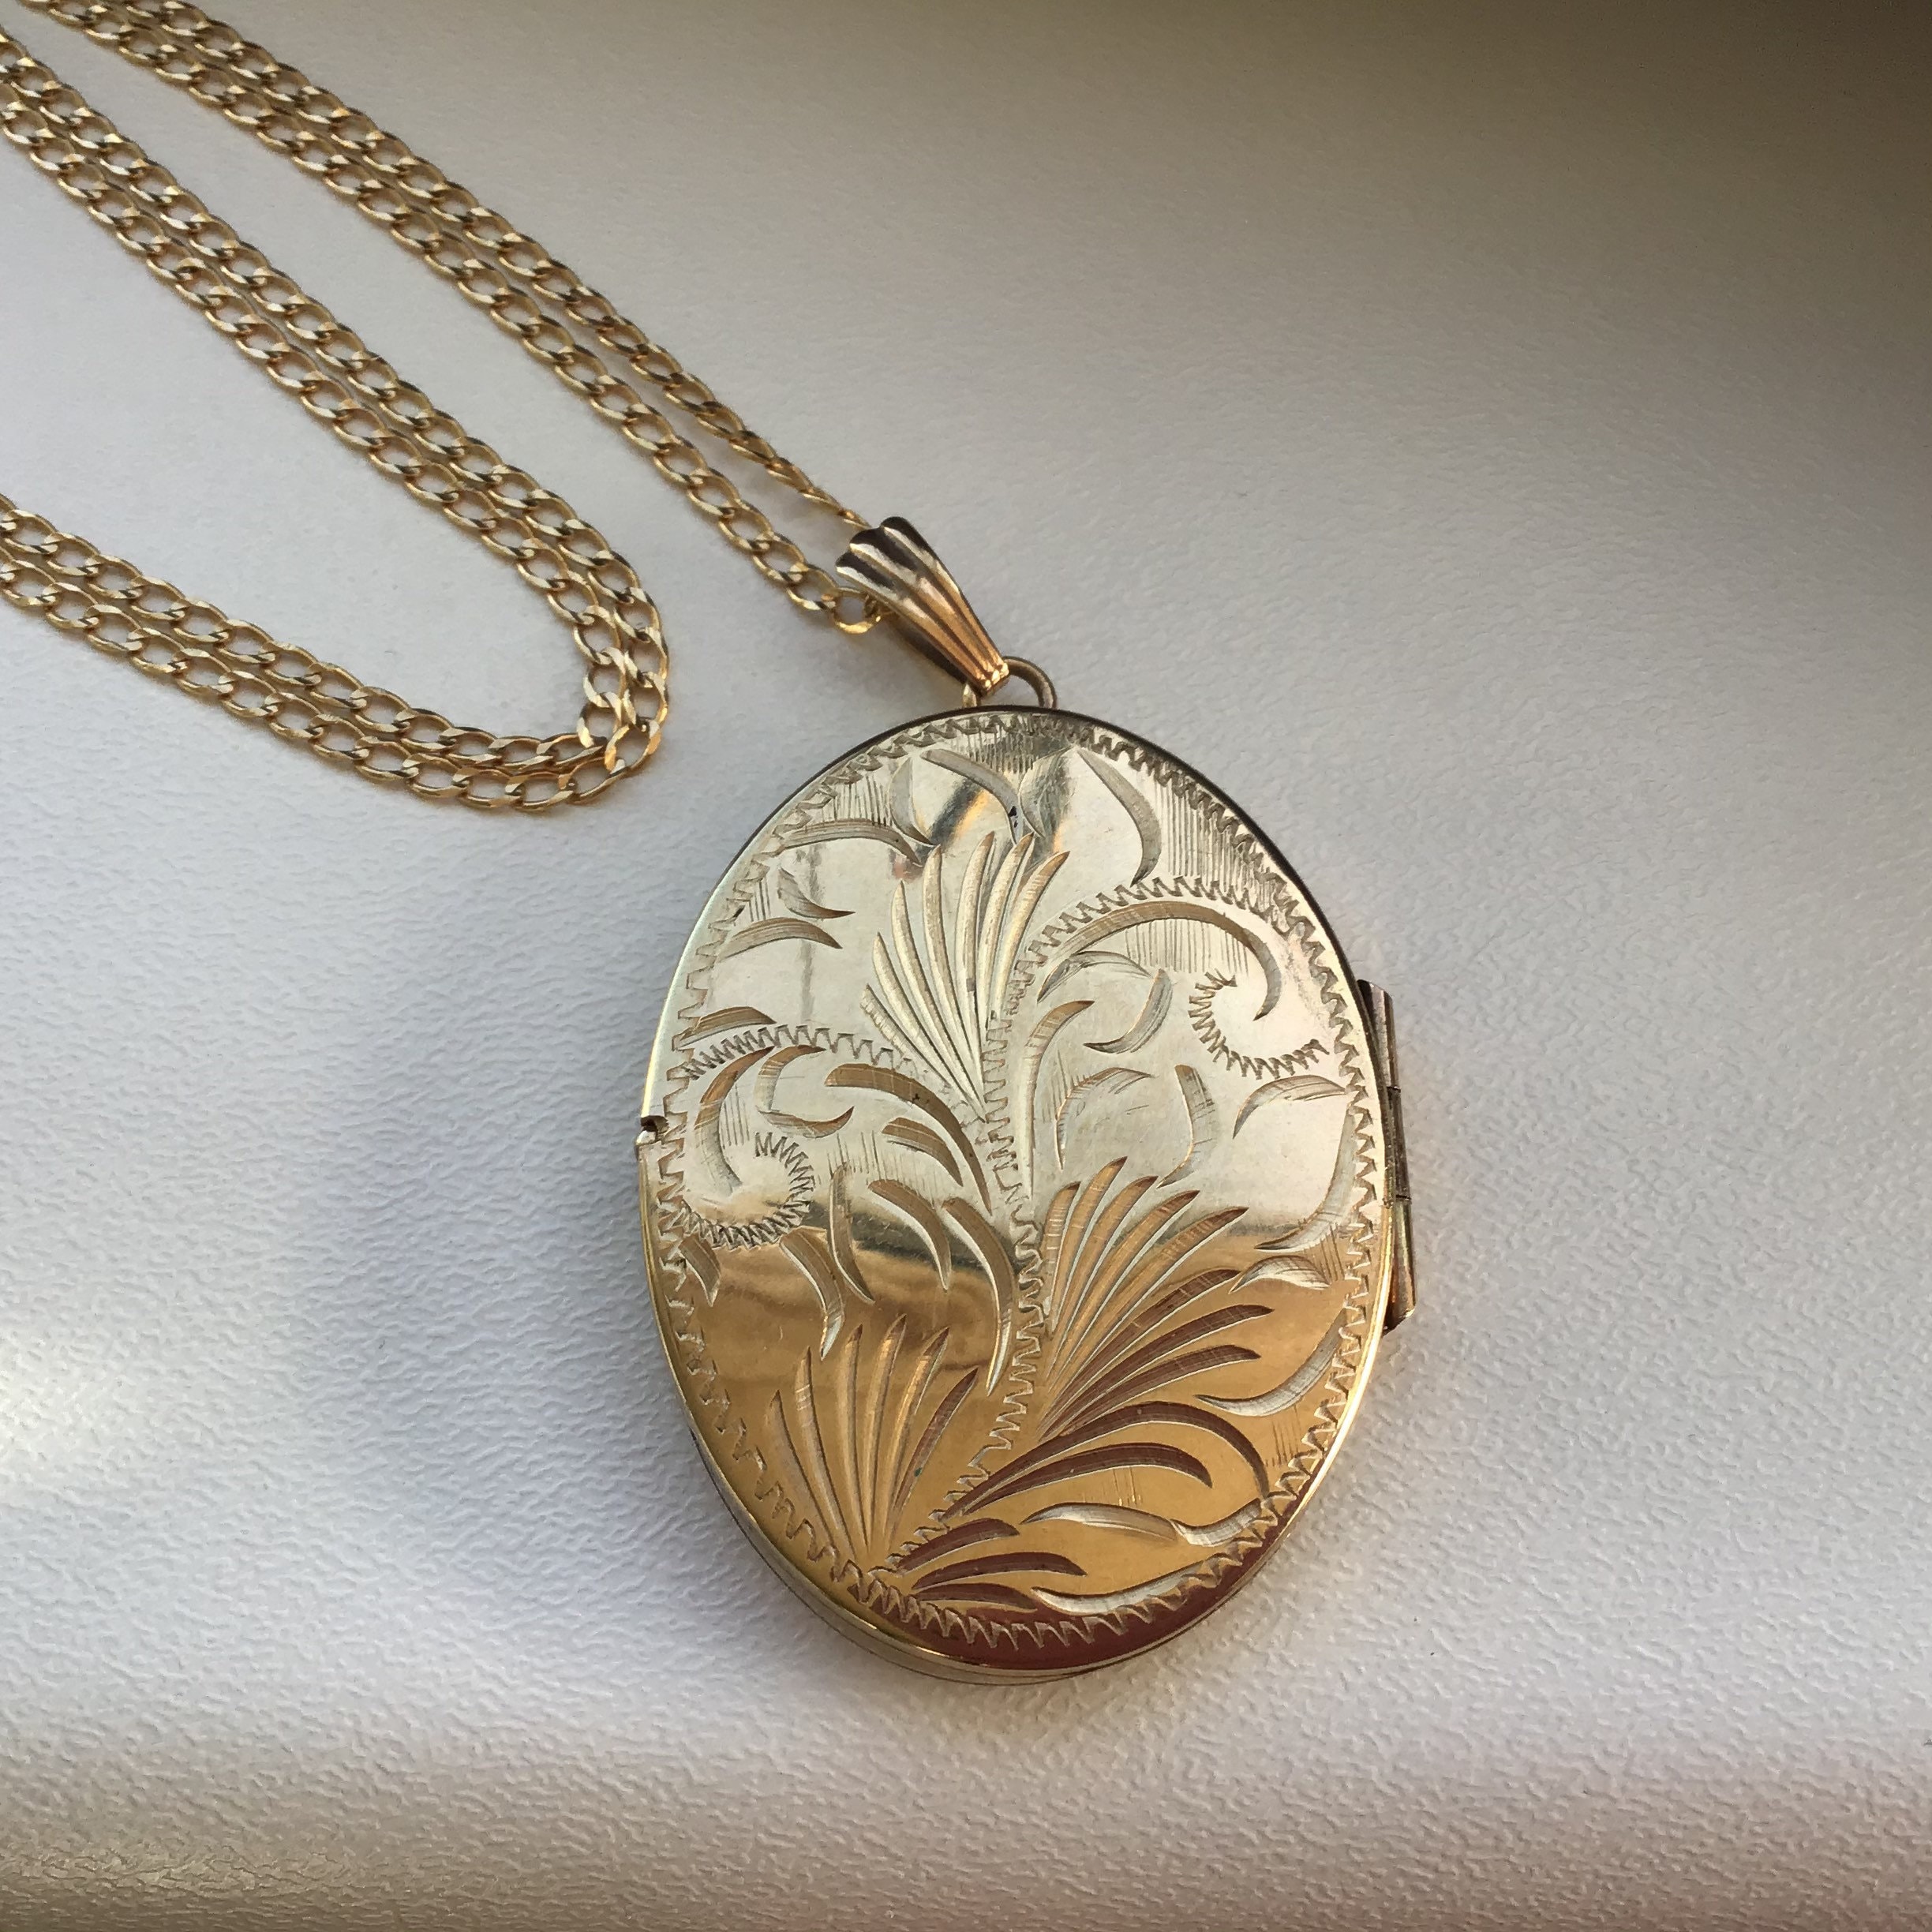 Vintage 9ct Gold Large Locket and Chain. 20 Inches. - Etsy